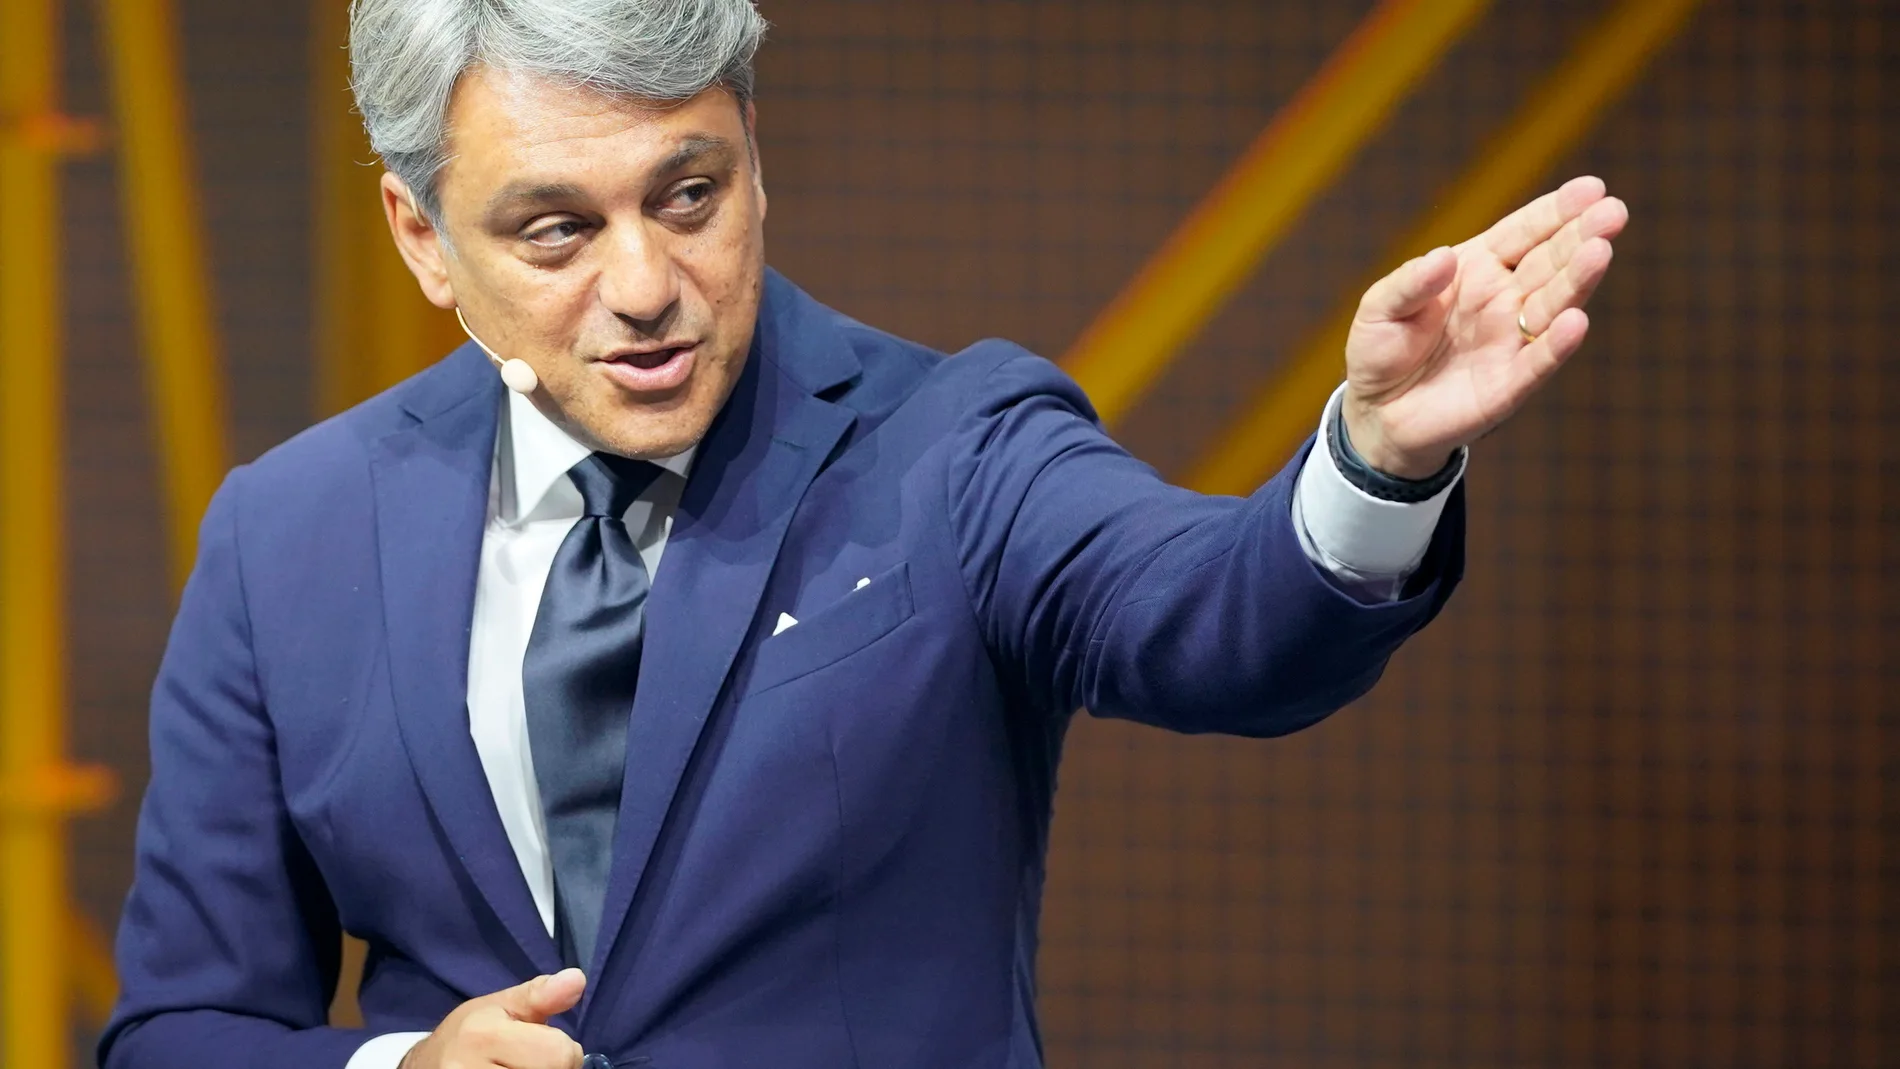 Frankfurt Main (Germany).- (FILE) - Then Seat CEO Luca de Meo gestures during the presentation of the Cupra Travascan during the IAA motor show in Frankfurt, Germany, 10 September 2019 (reissued 13 January 2021). Groupe Renault CEO Luca de Meo will present the French carmaker's strategic plans called 'Renaulution' at the group's headquarters on 14 January 2021. (Francia, Alemania) EFE/EPA/RONALD WITTEK *** Local Caption *** 55456747